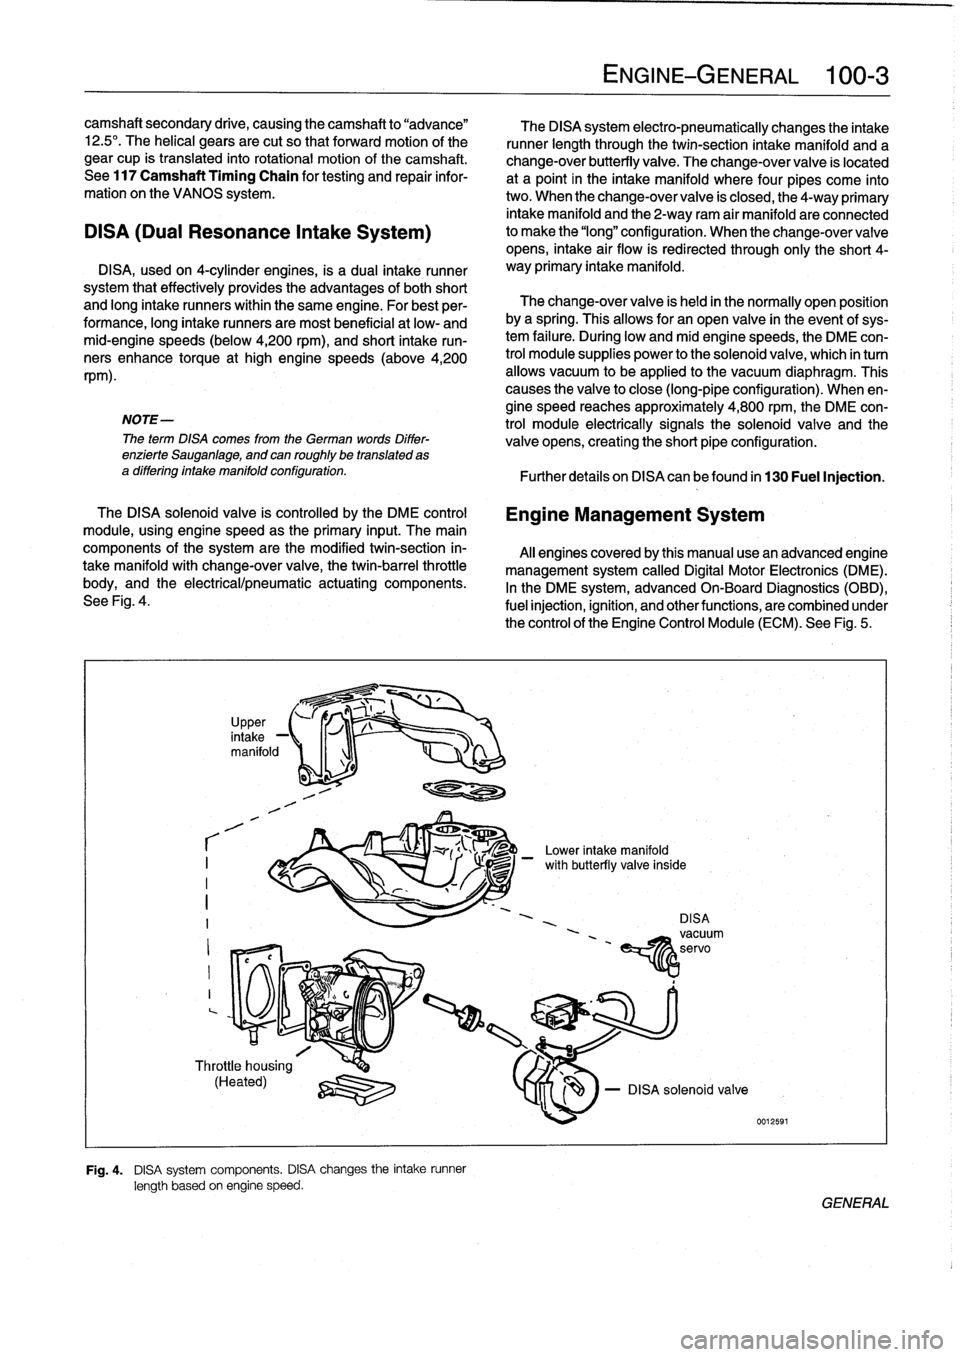 BMW 318i 1998 E36 Workshop Manual camshaft
secondary
drive,
causing
thecamshaft
to
"advance"

12
.5°
.
The
helical
gears
are
cut
so
that
forward
motion
of
the

gear
cup
is
transiated
into
rotational
motion
of
the
camshaft
.

See
117
